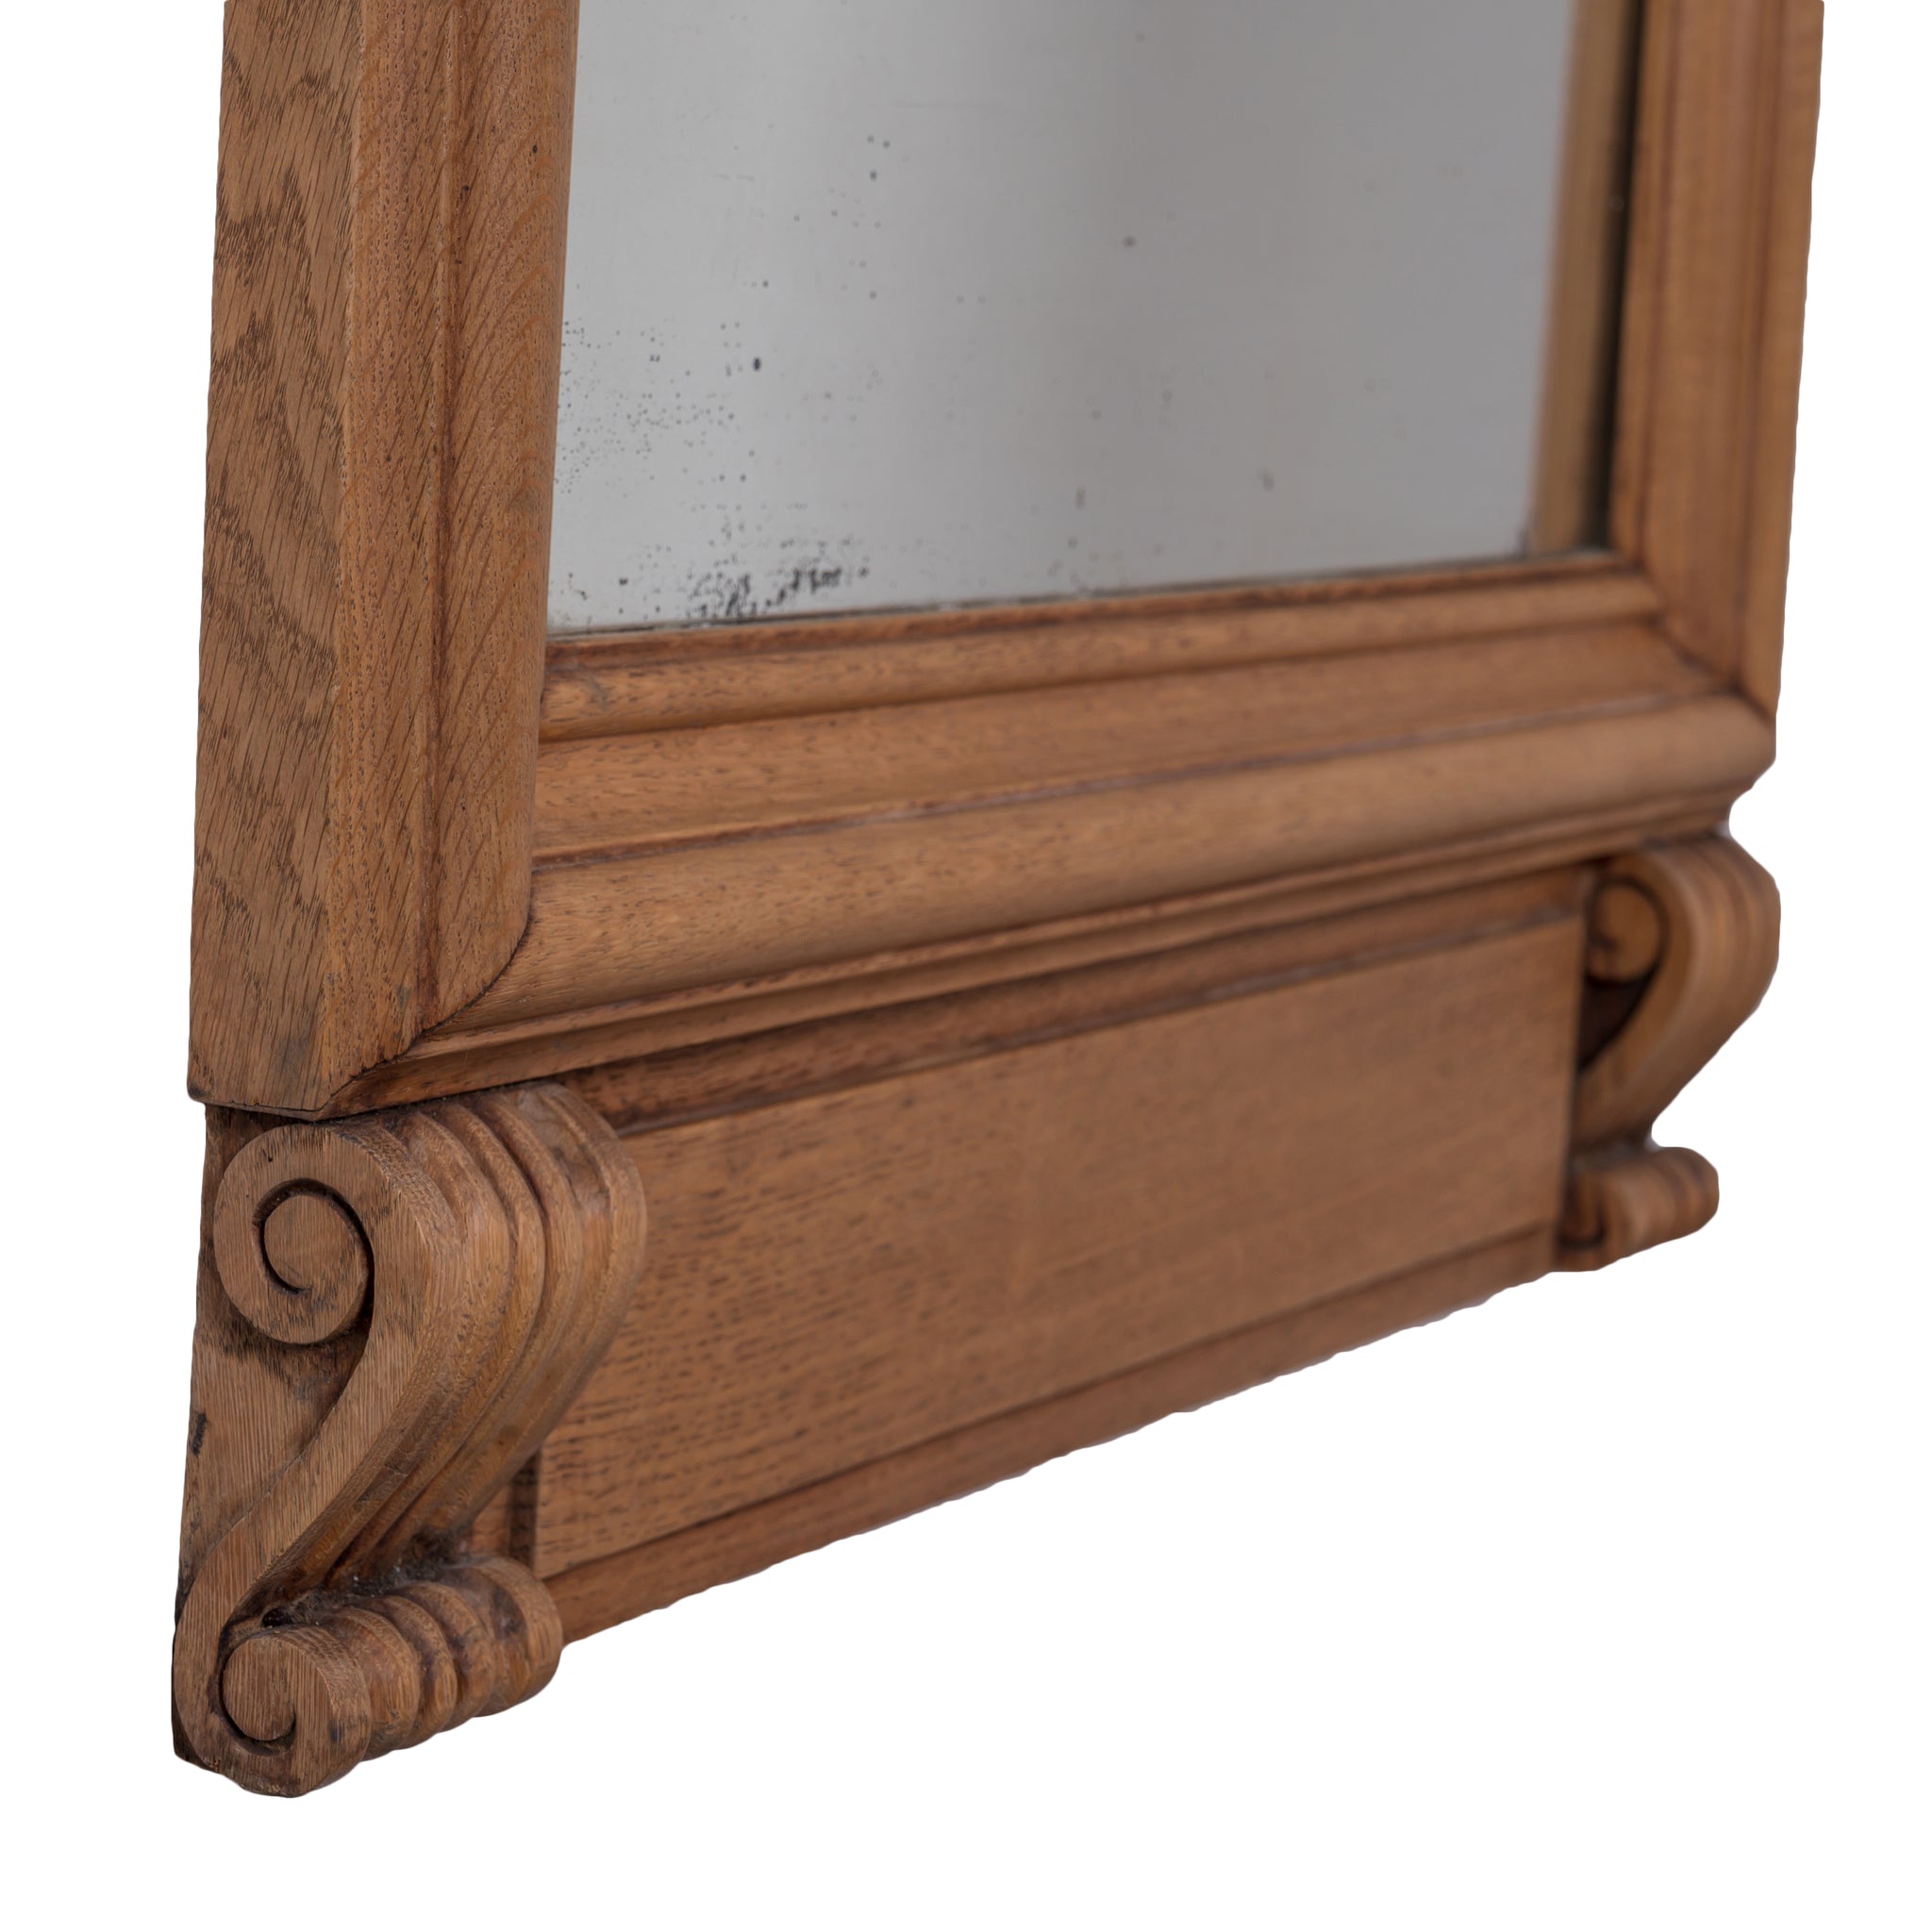 French Neoclassical Style Limed Oak Trumeau Mirrors, 19th Century - A Pair